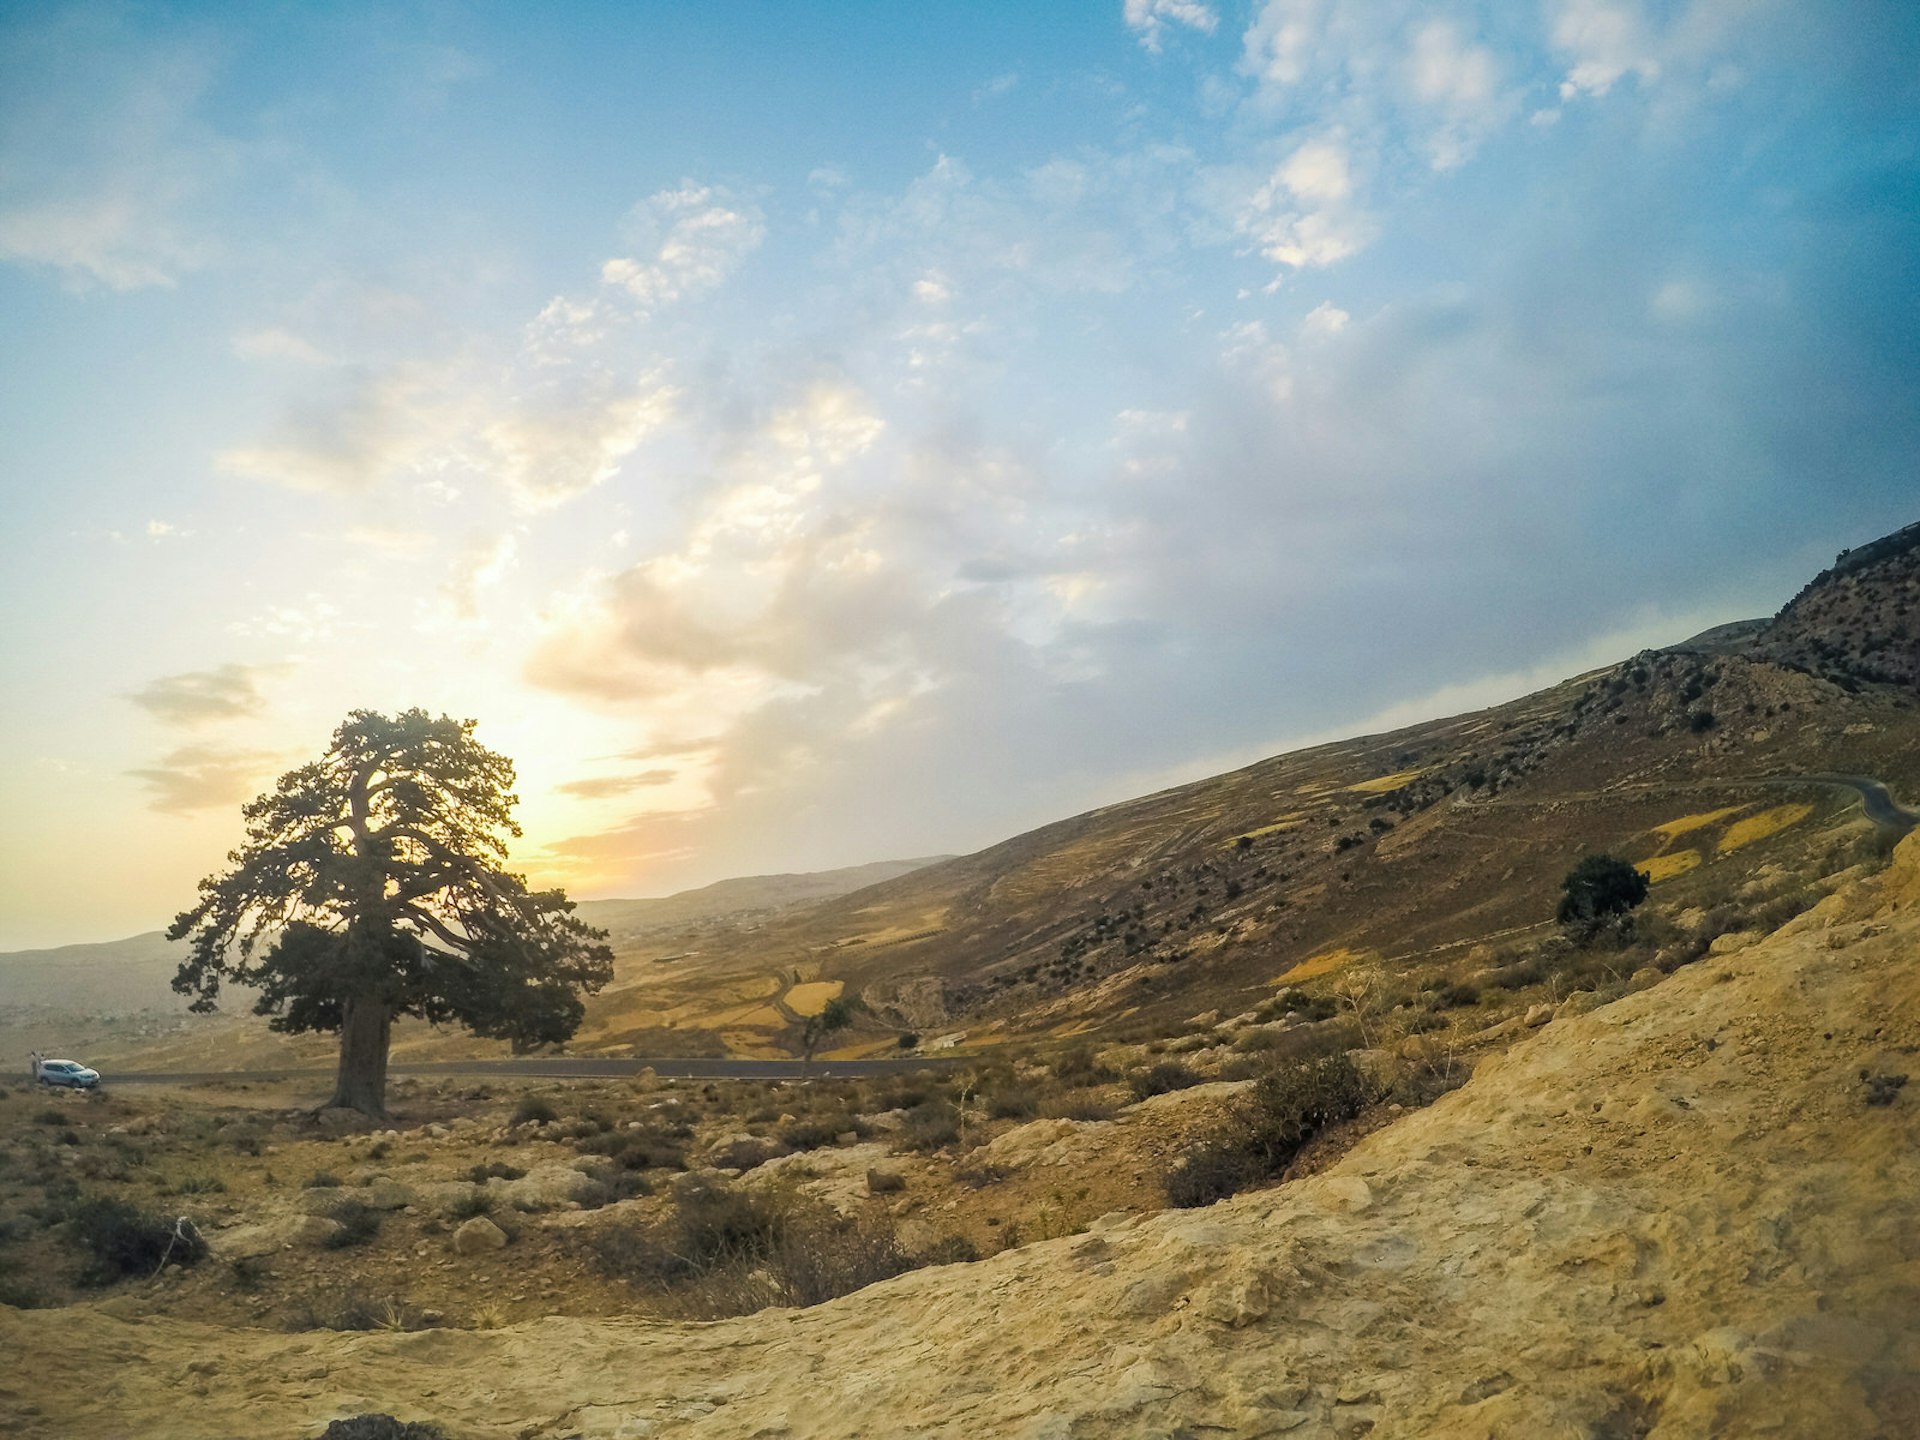 Rare encounters with a paved road along the Jordan Trail near the Dana Biosphere Reserve. Image by Ali Barqawi Studios